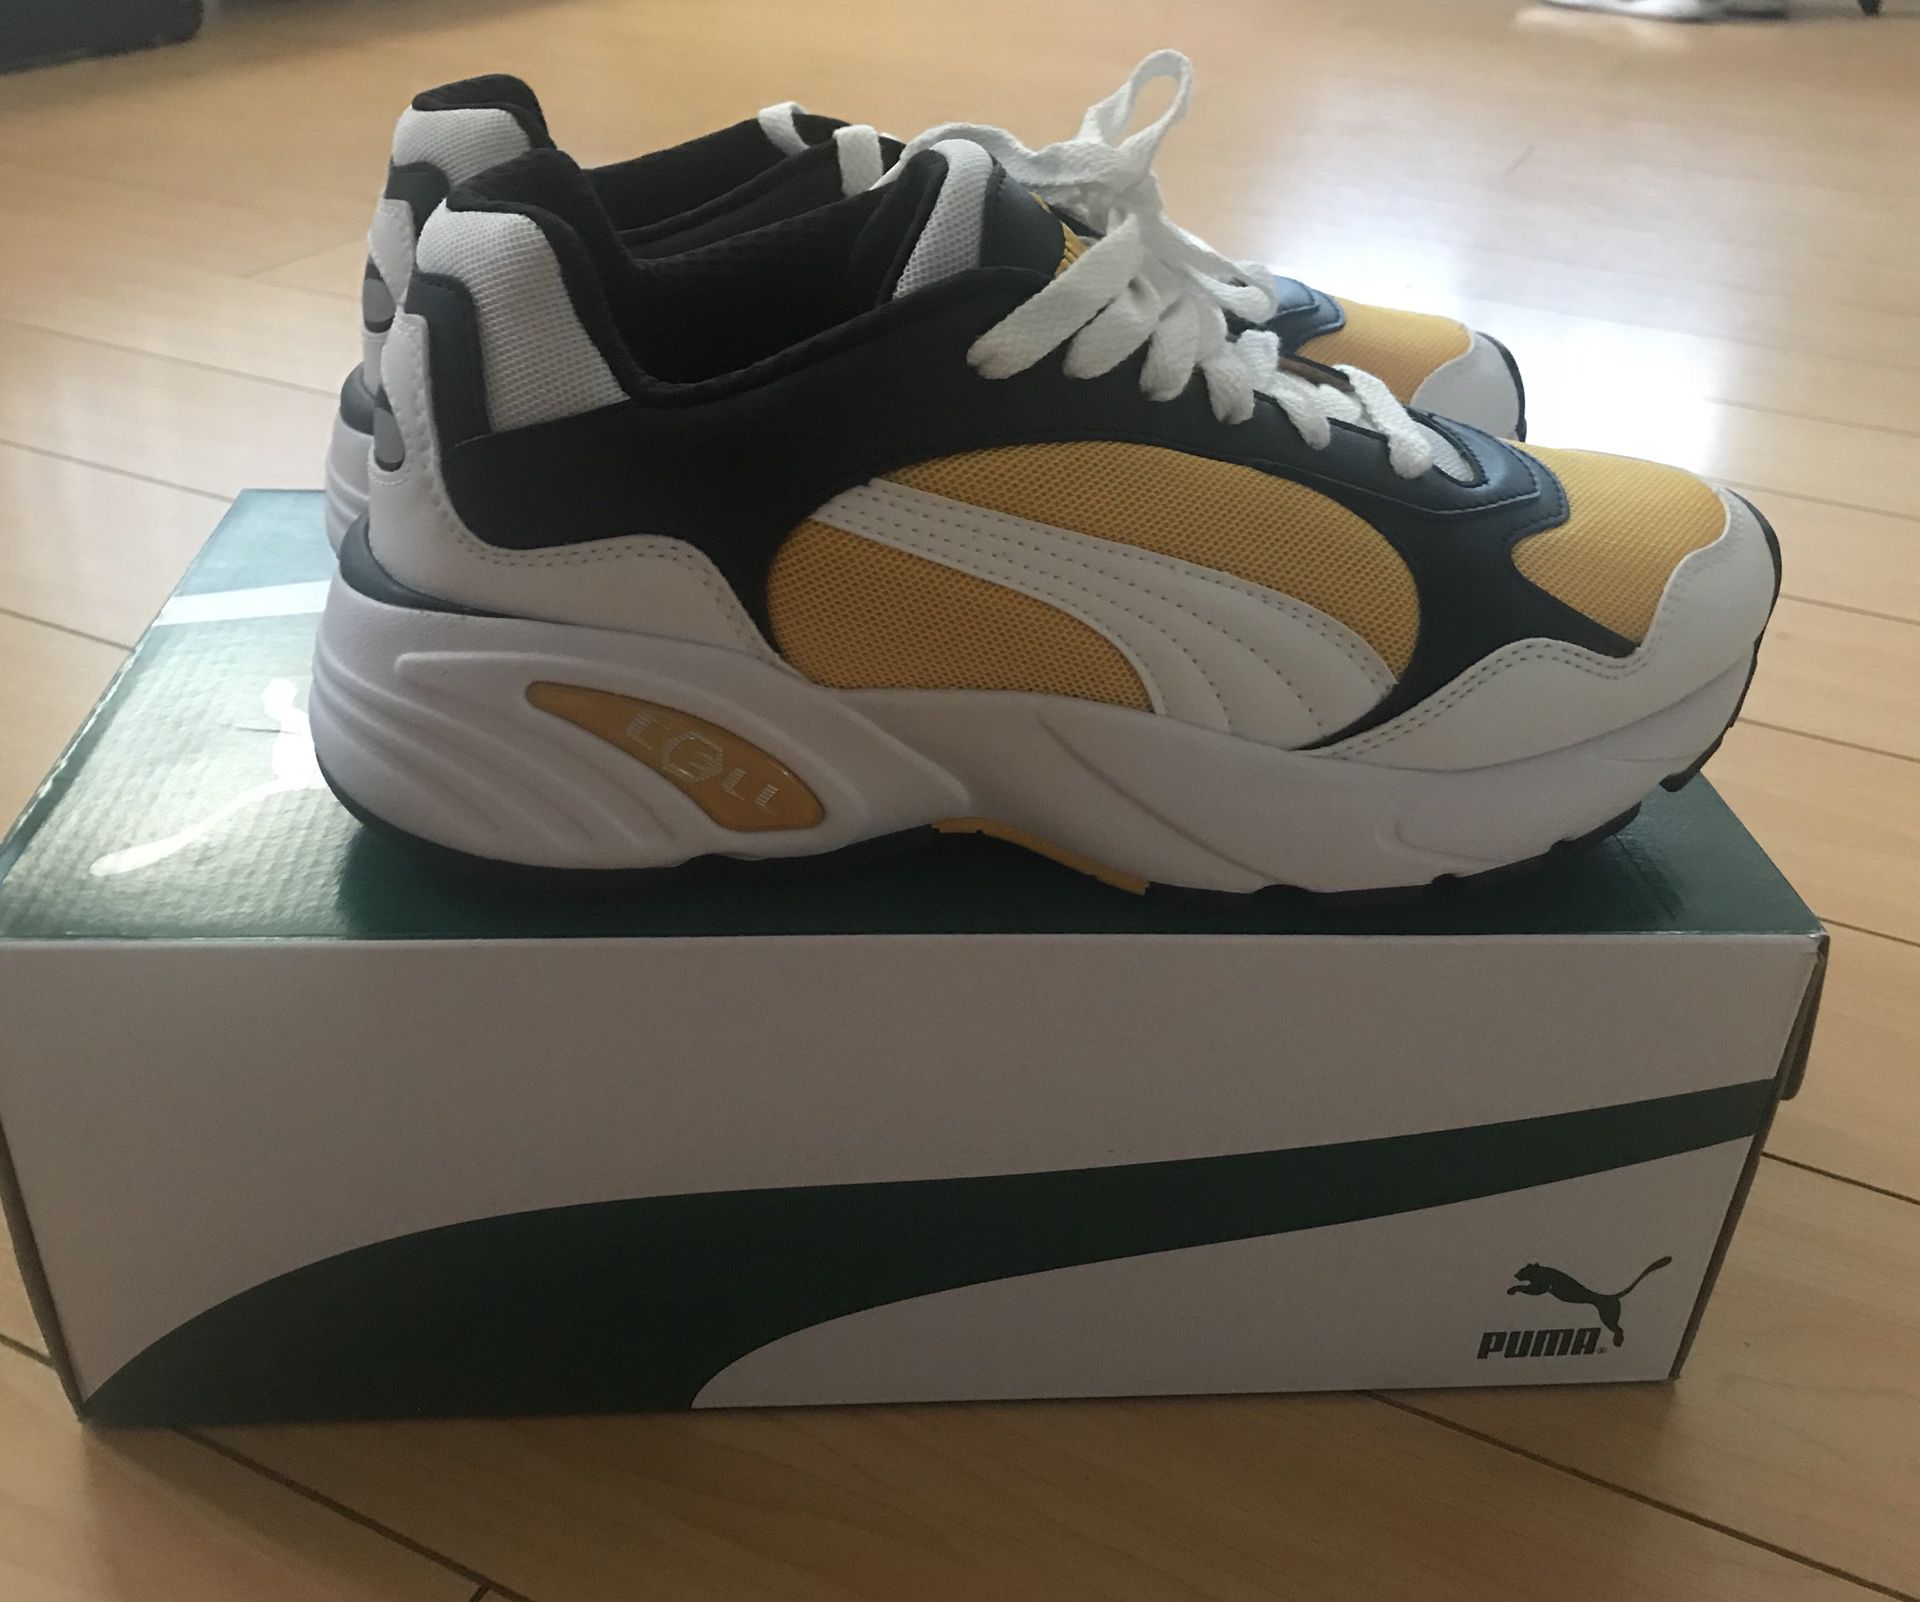 PUMA CELL VIPER SNEAKERS US 9 for Sale Los Angeles, CA - OfferUp